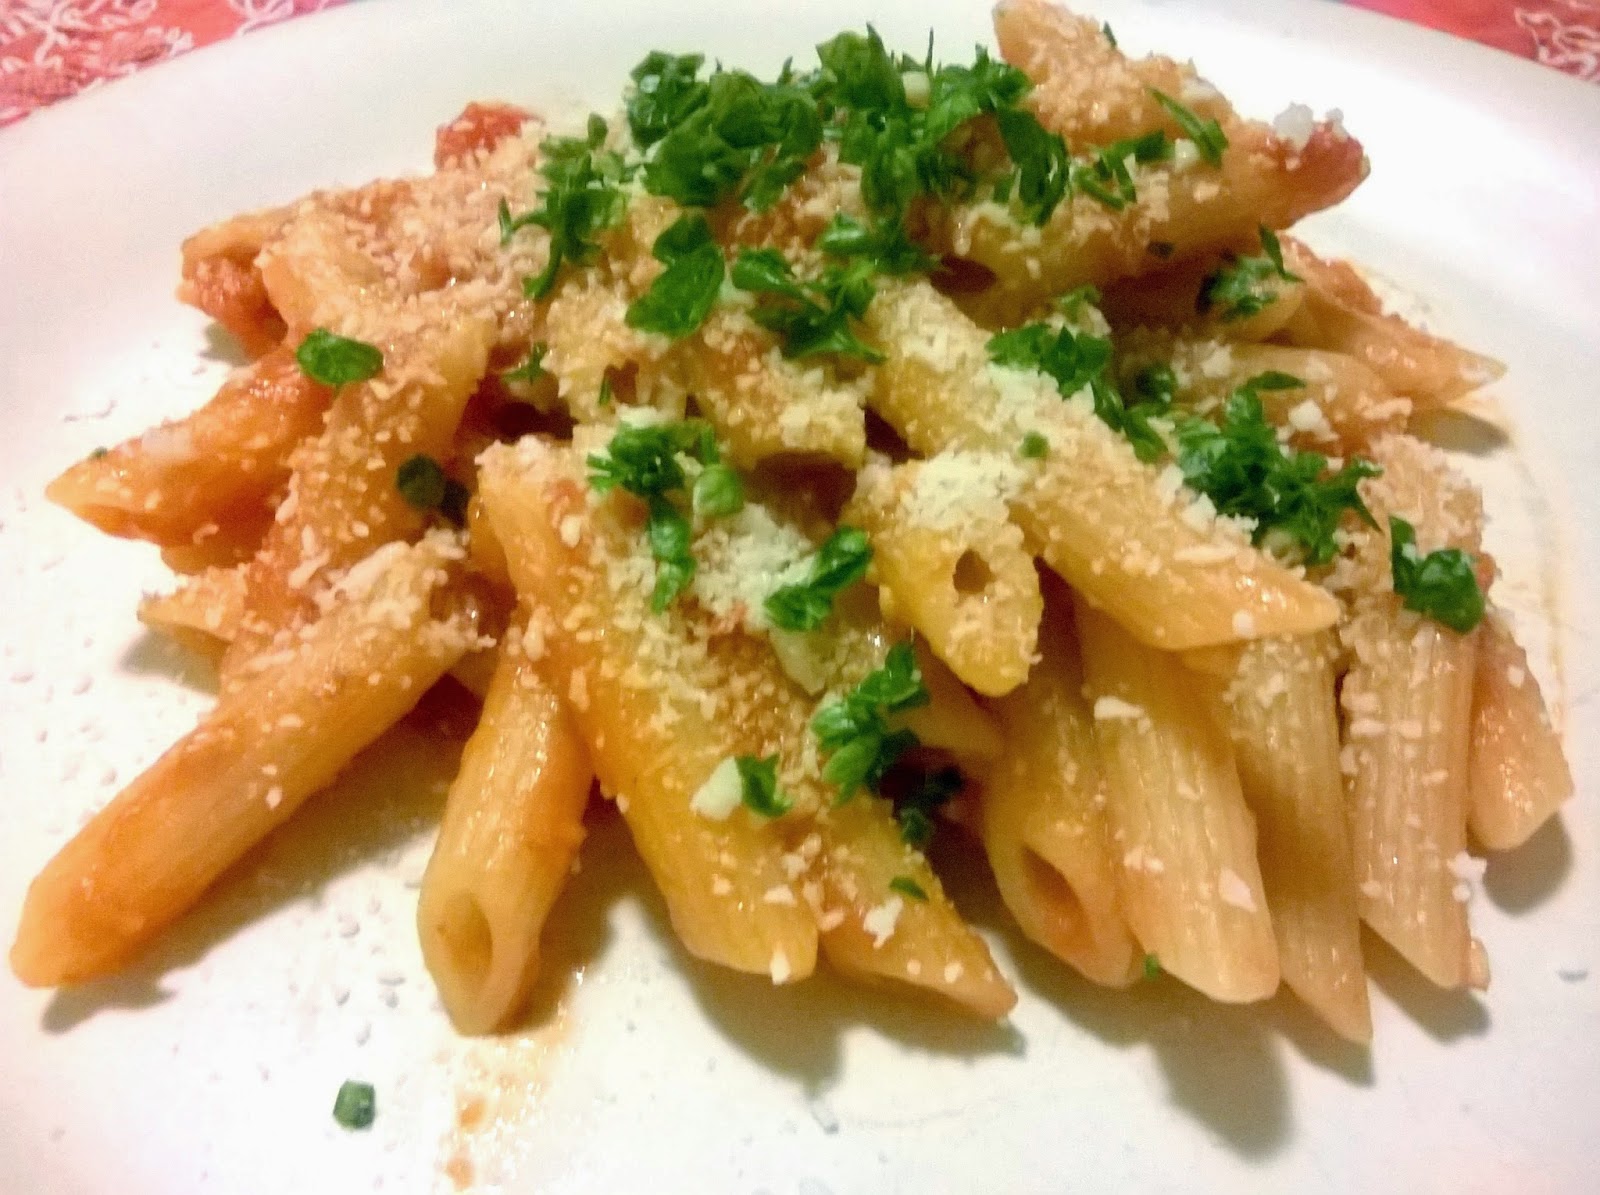 penne all'arrabbiata: a fresh, healthy and delicious meal!